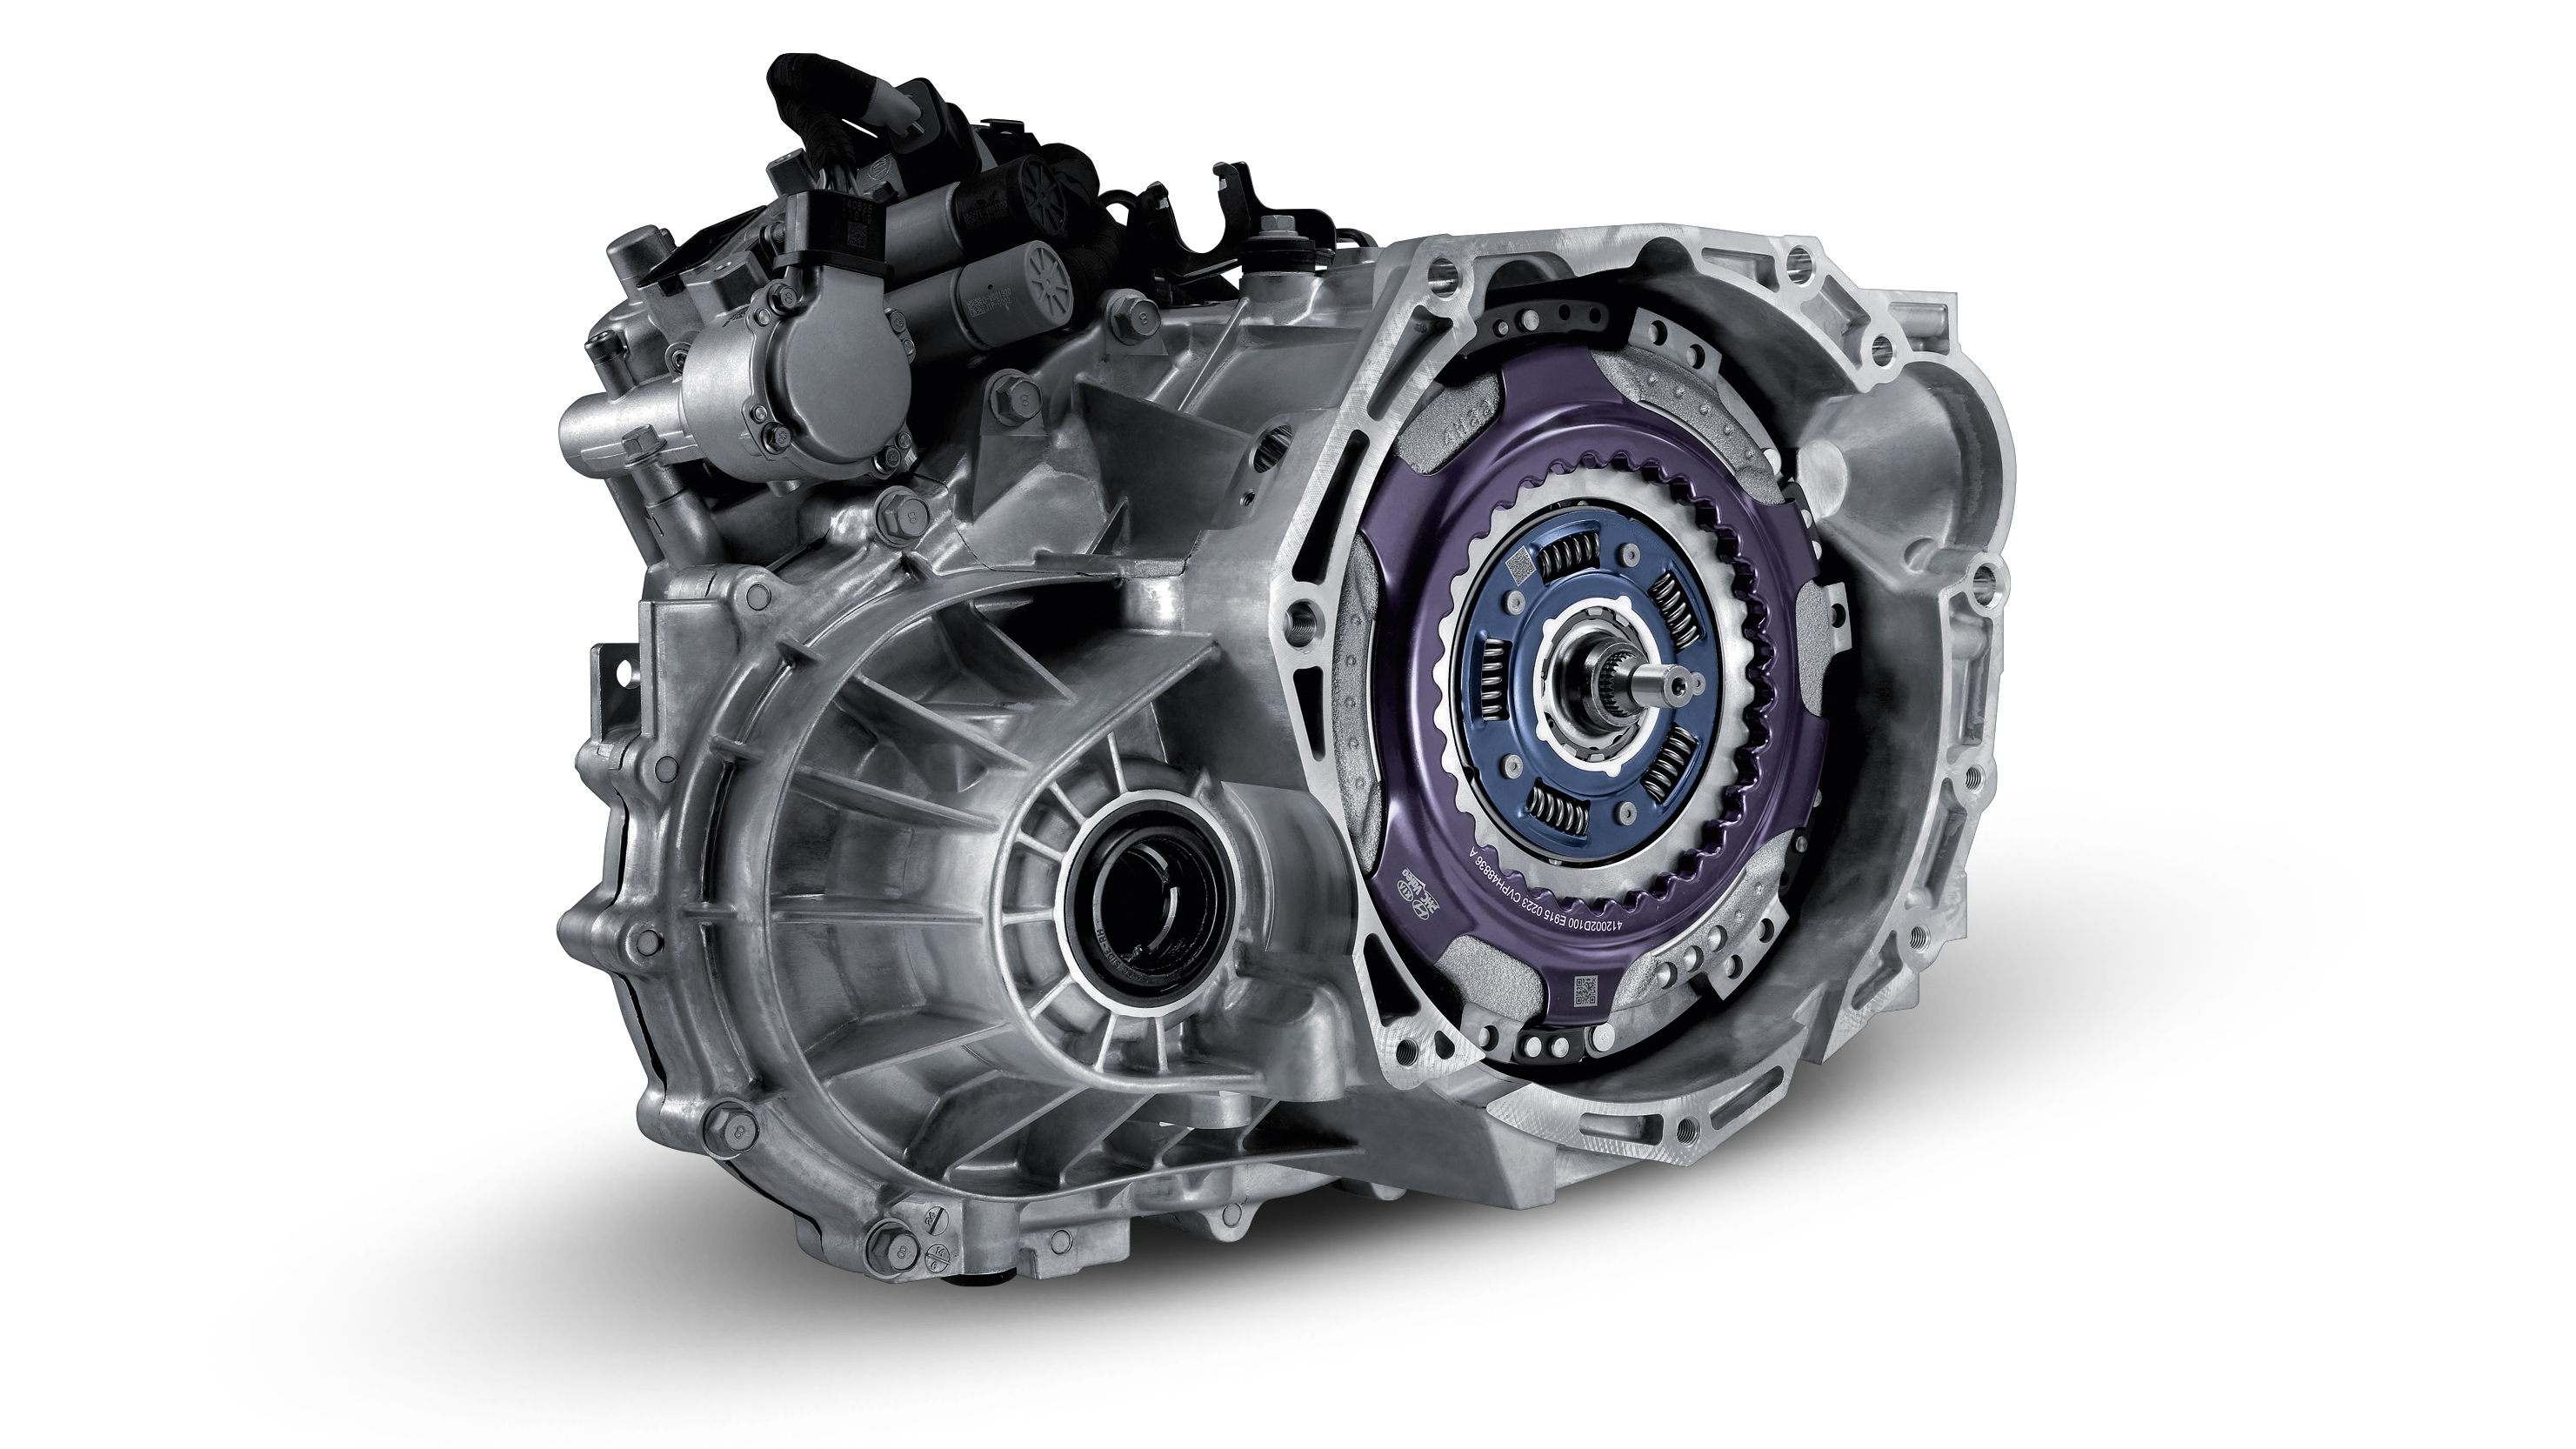 The 7-speed dual clutch transmission gearbox of the Hyundai i20